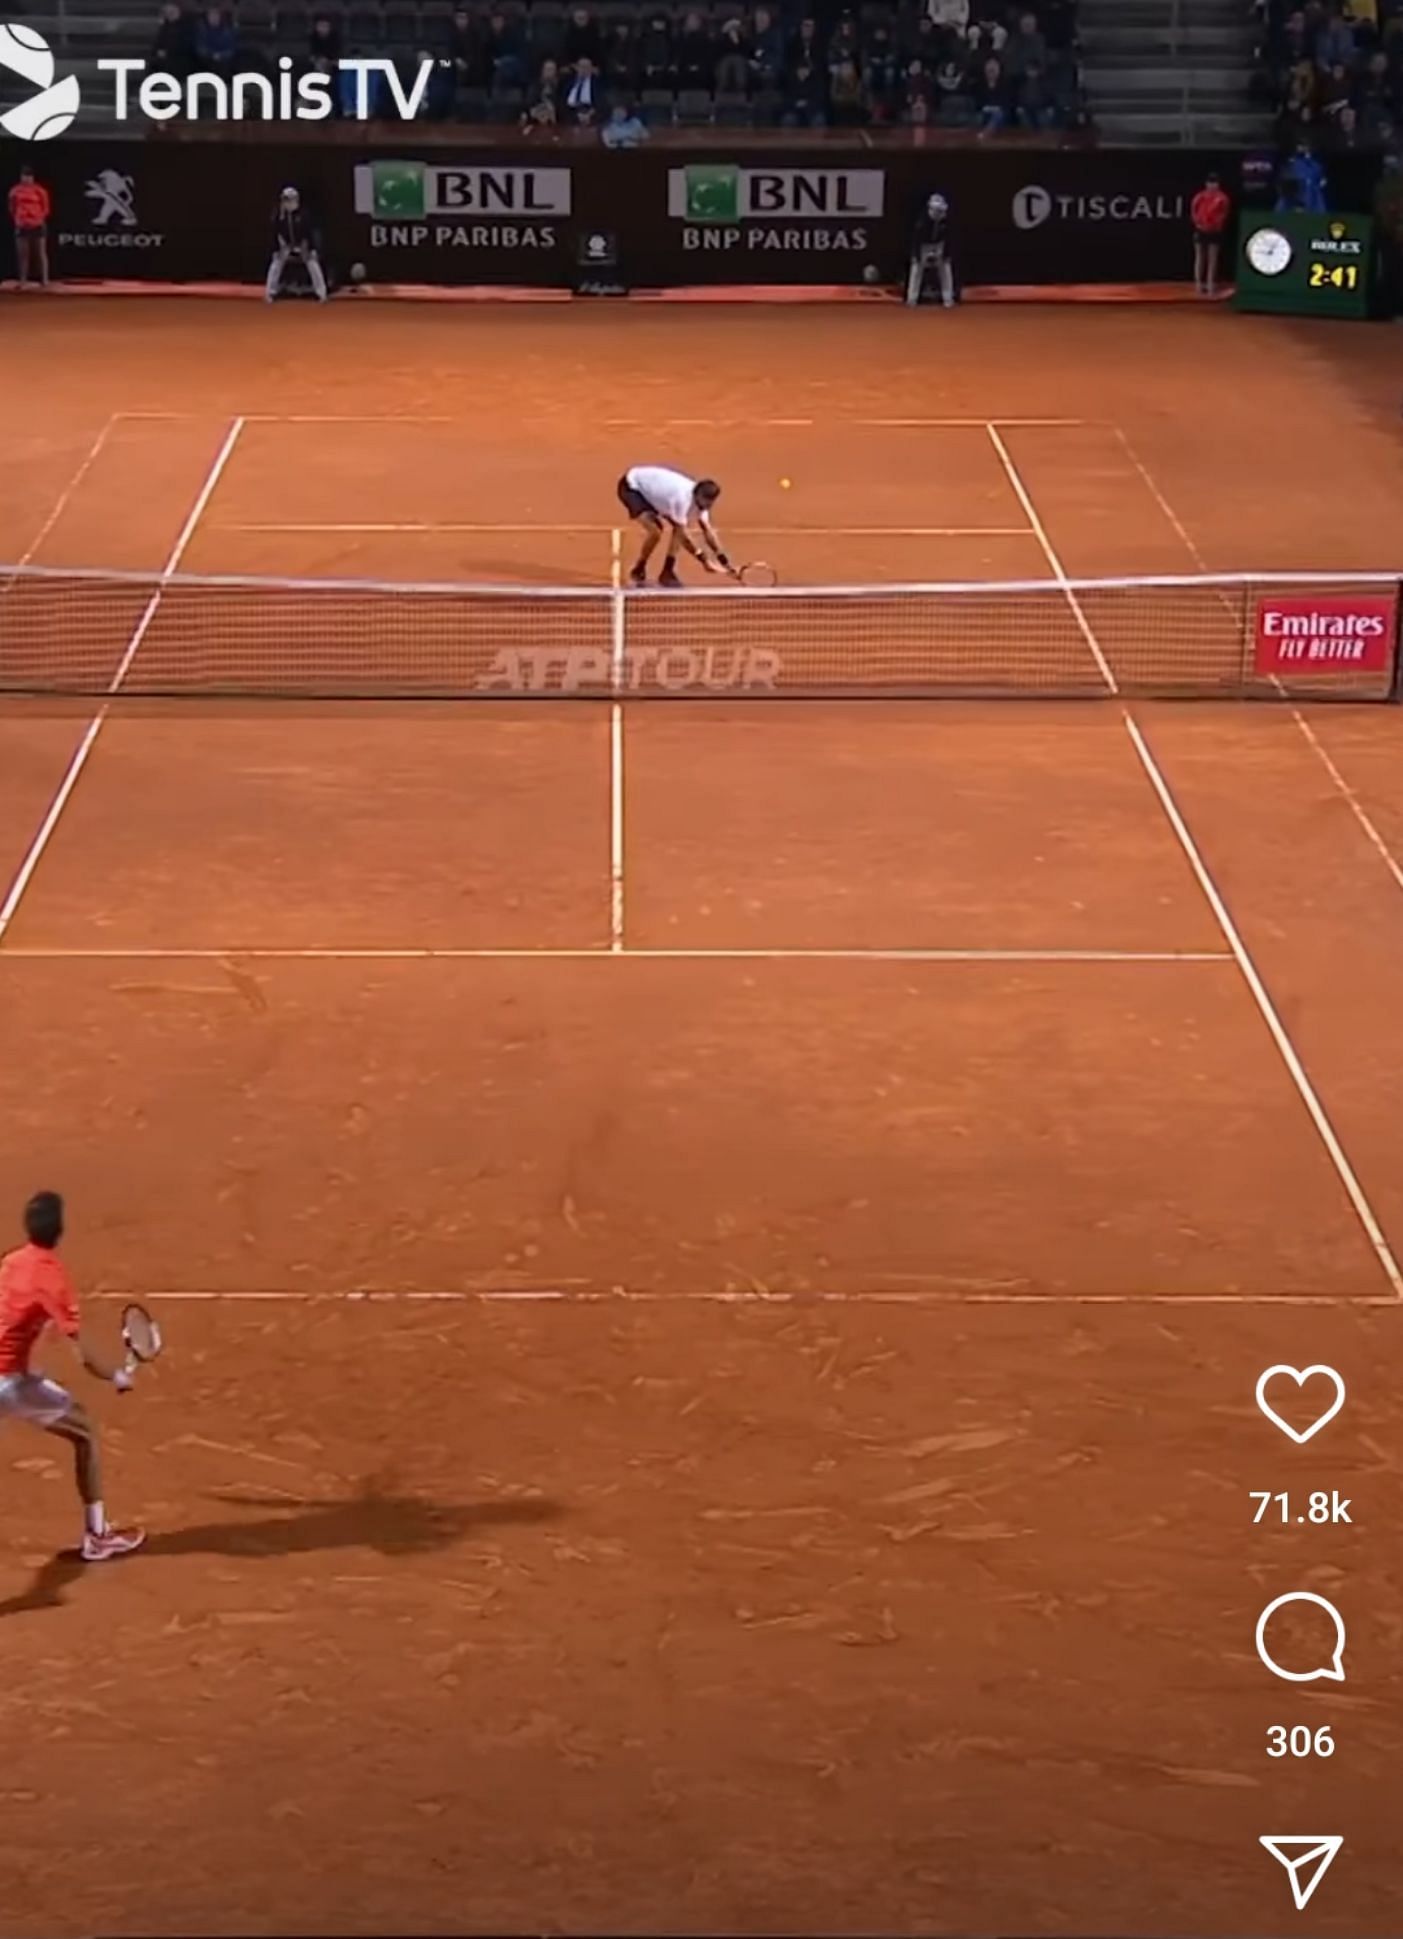 Juan Martin del Potro came up with a brilliant volley against the World No. 1 at the 2019 Italian Open